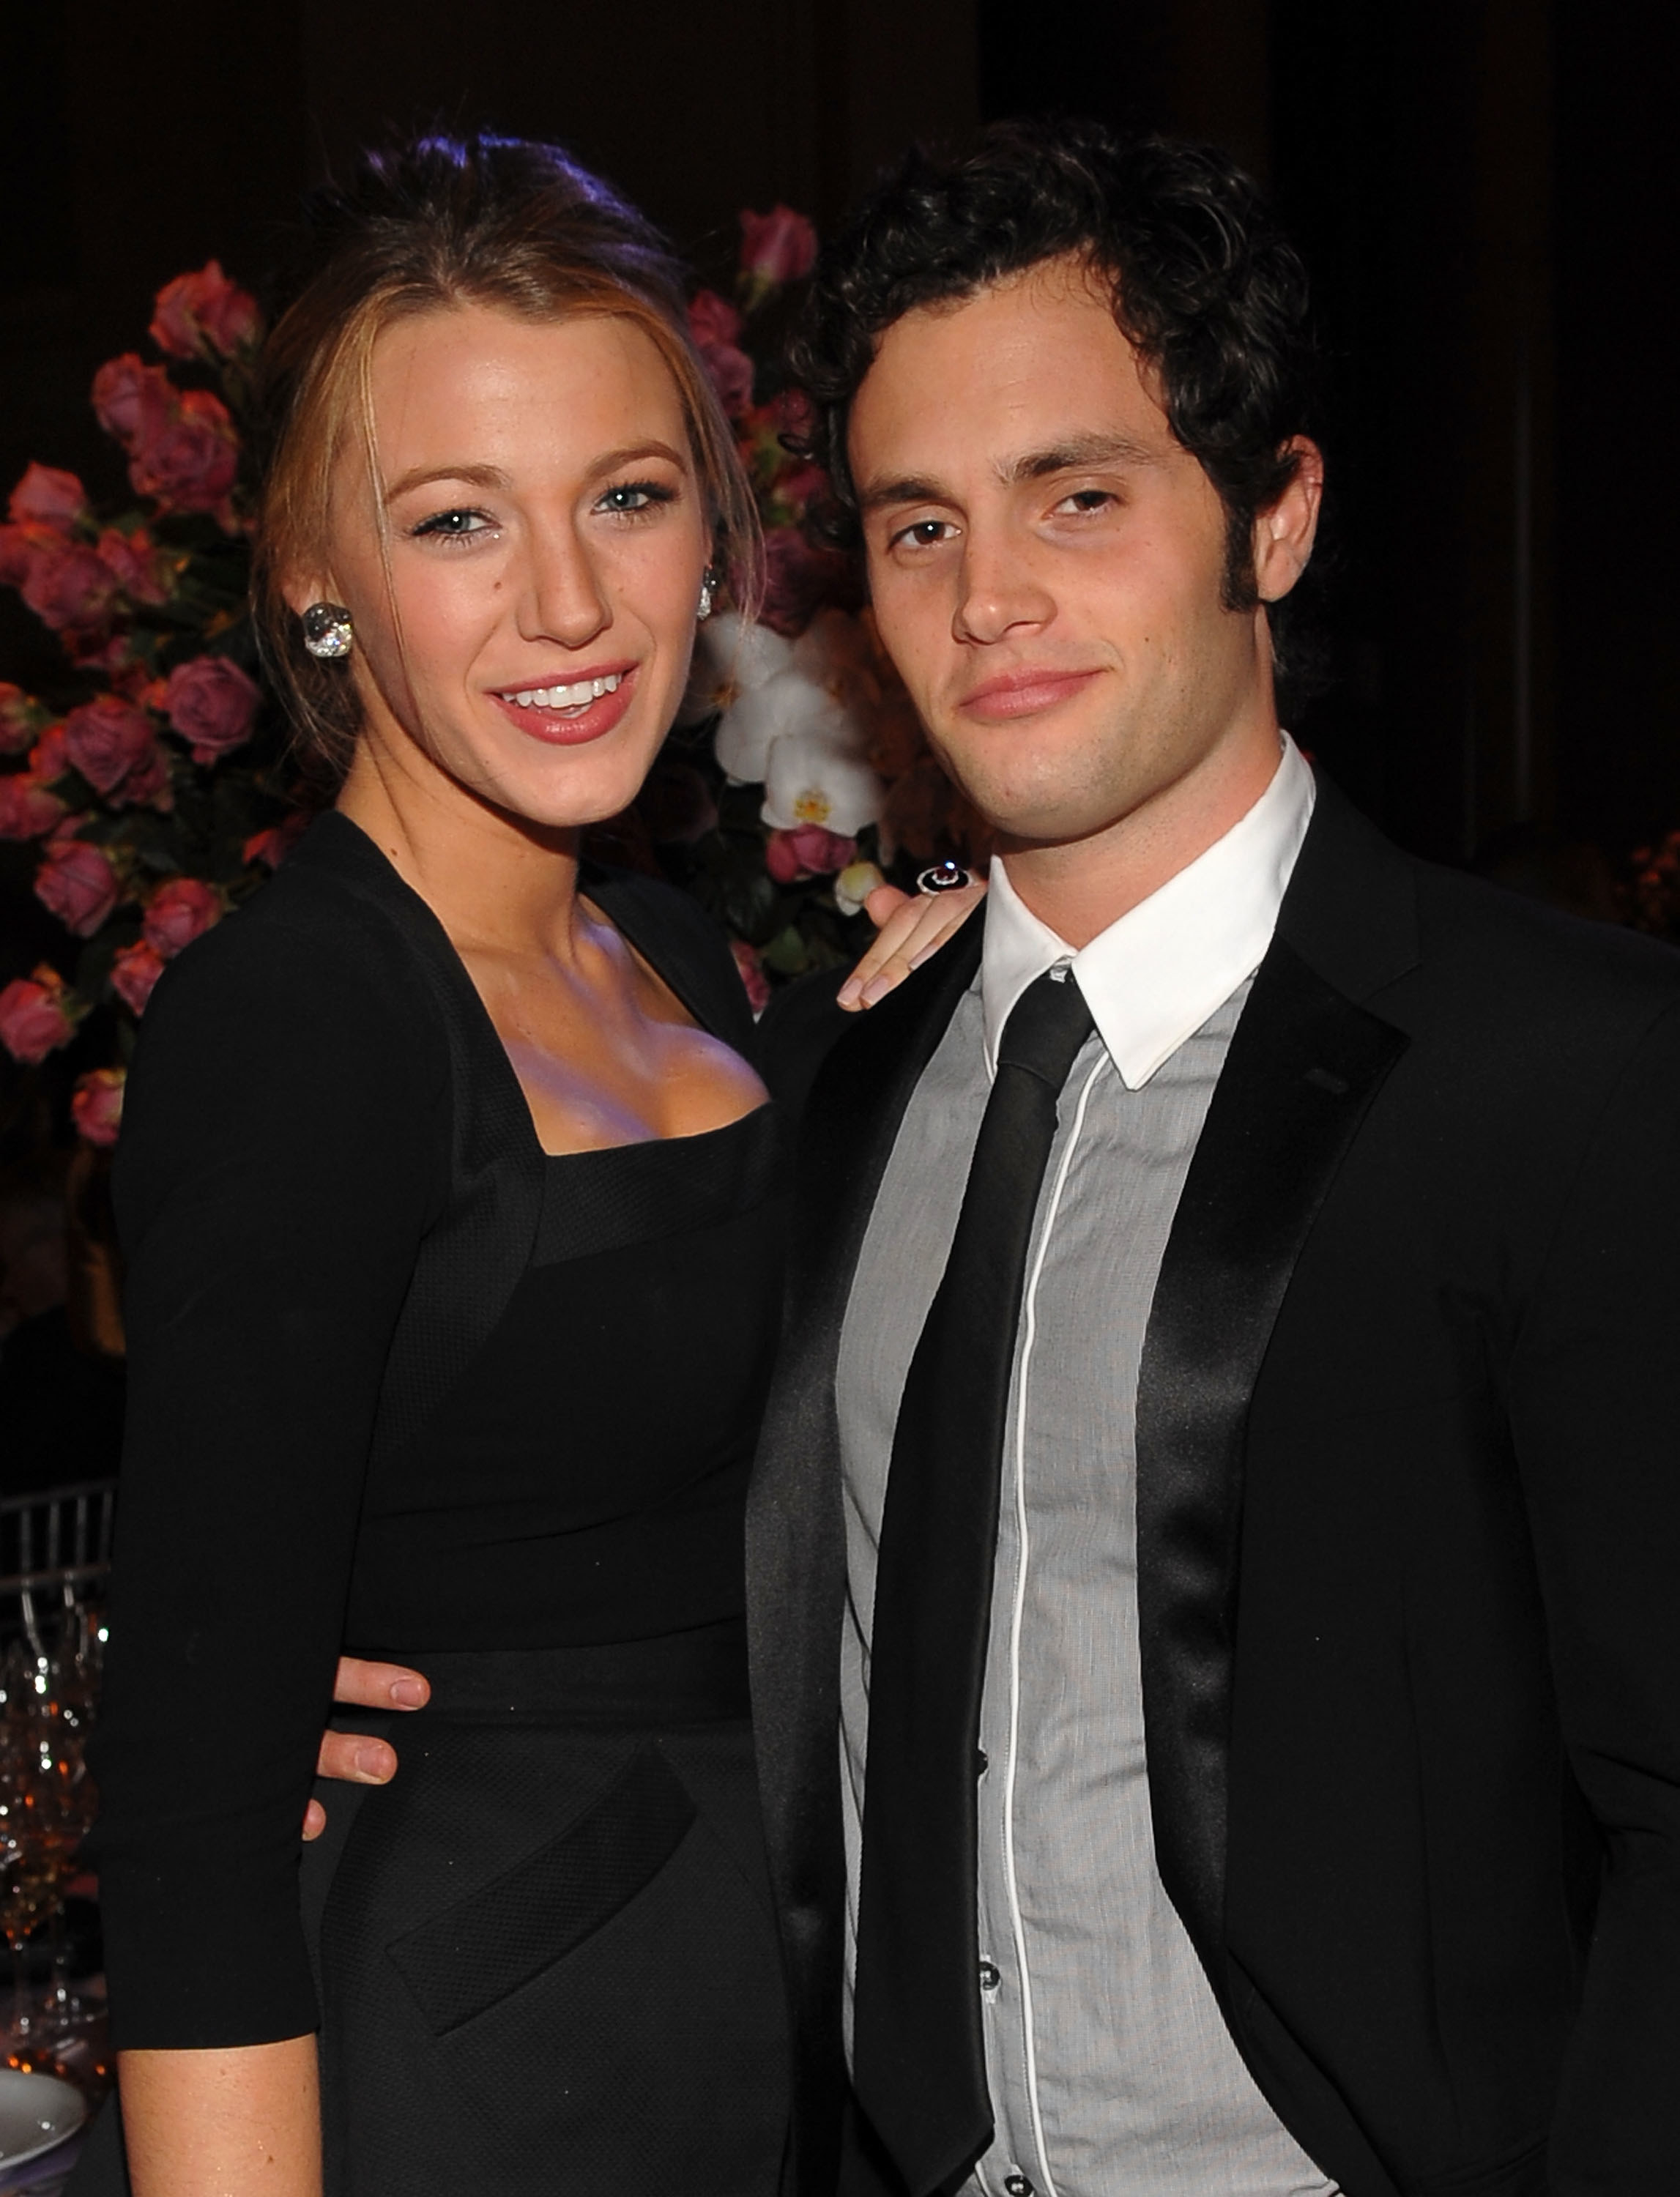 Blake Lively and Penn Badgley at an event